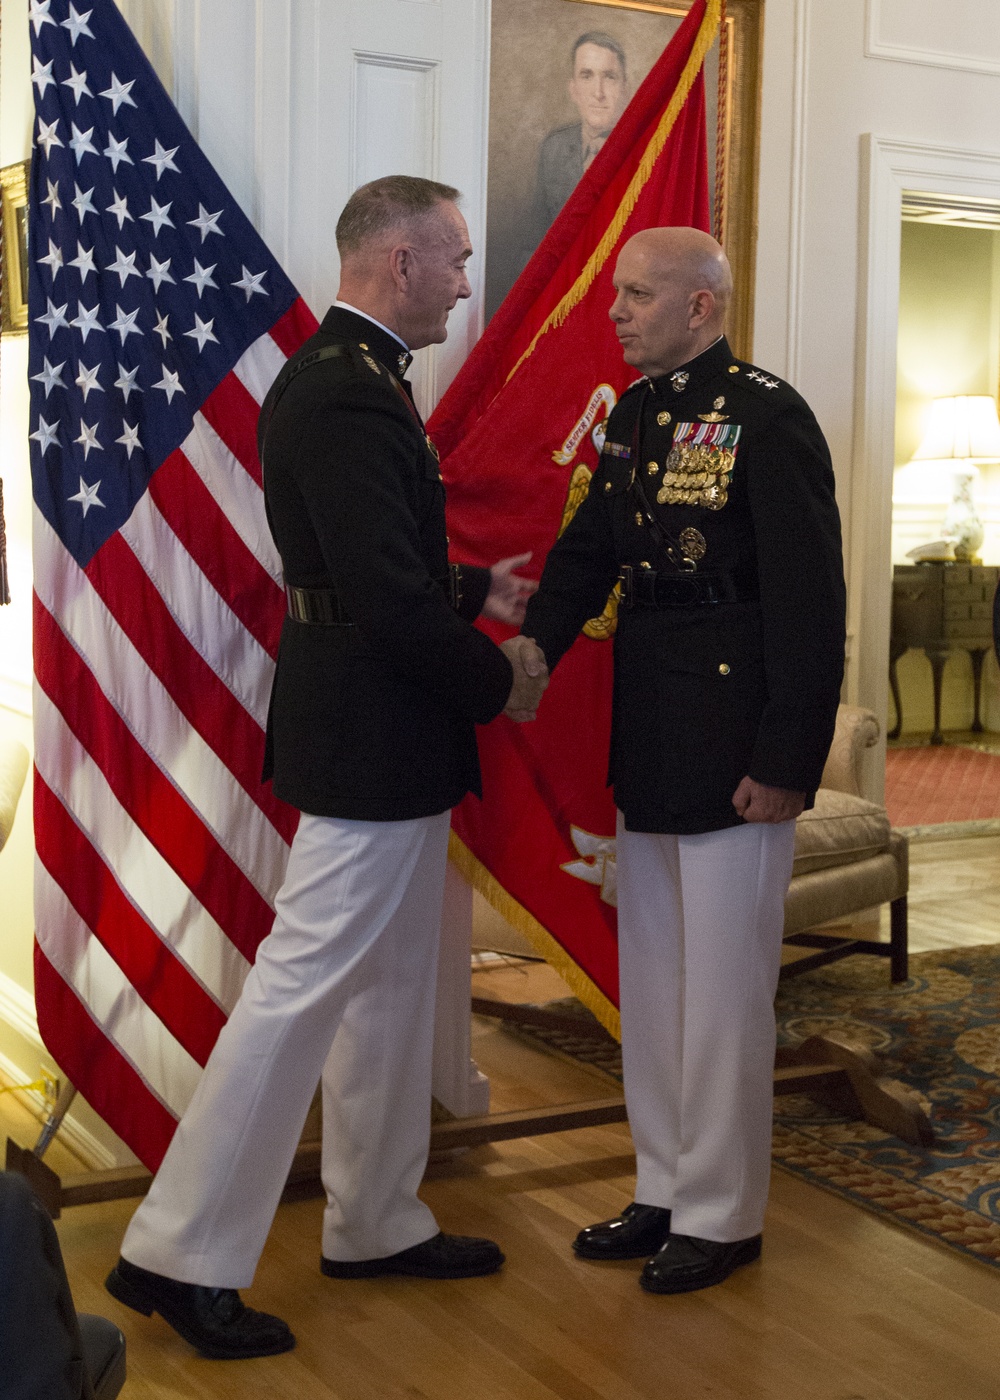 Gen. David H. Berger is promoted to the rank of general by the Chairman of the Joint Chiefs of Staff Gen. Joseph F. Dunford.